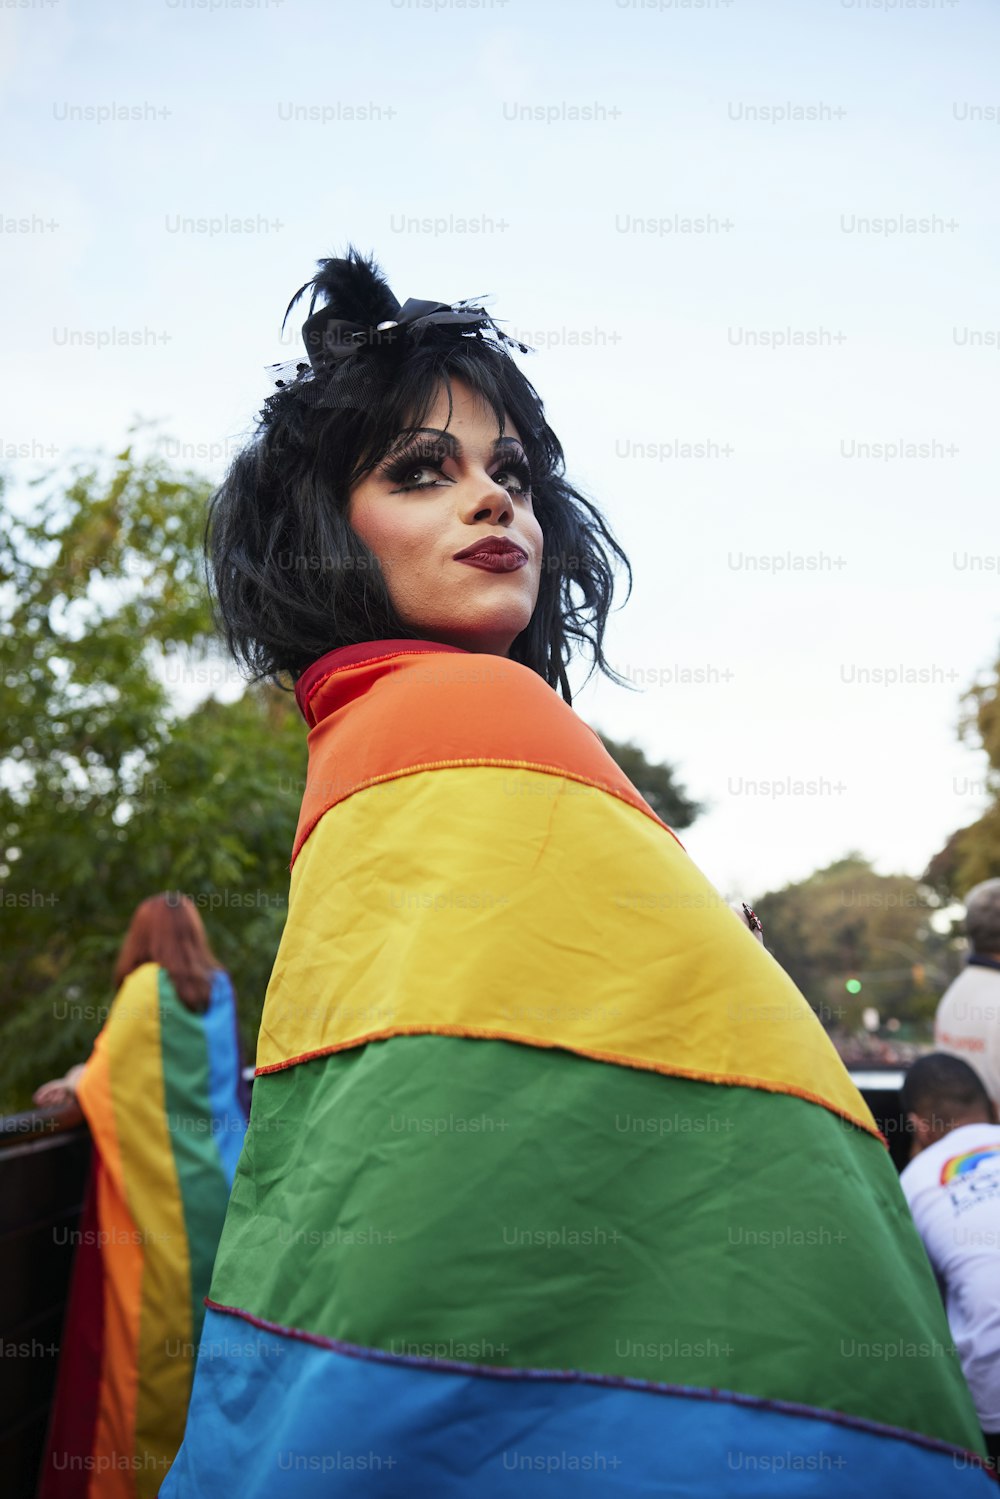 a woman wearing a rainbow colored jacket and black hair